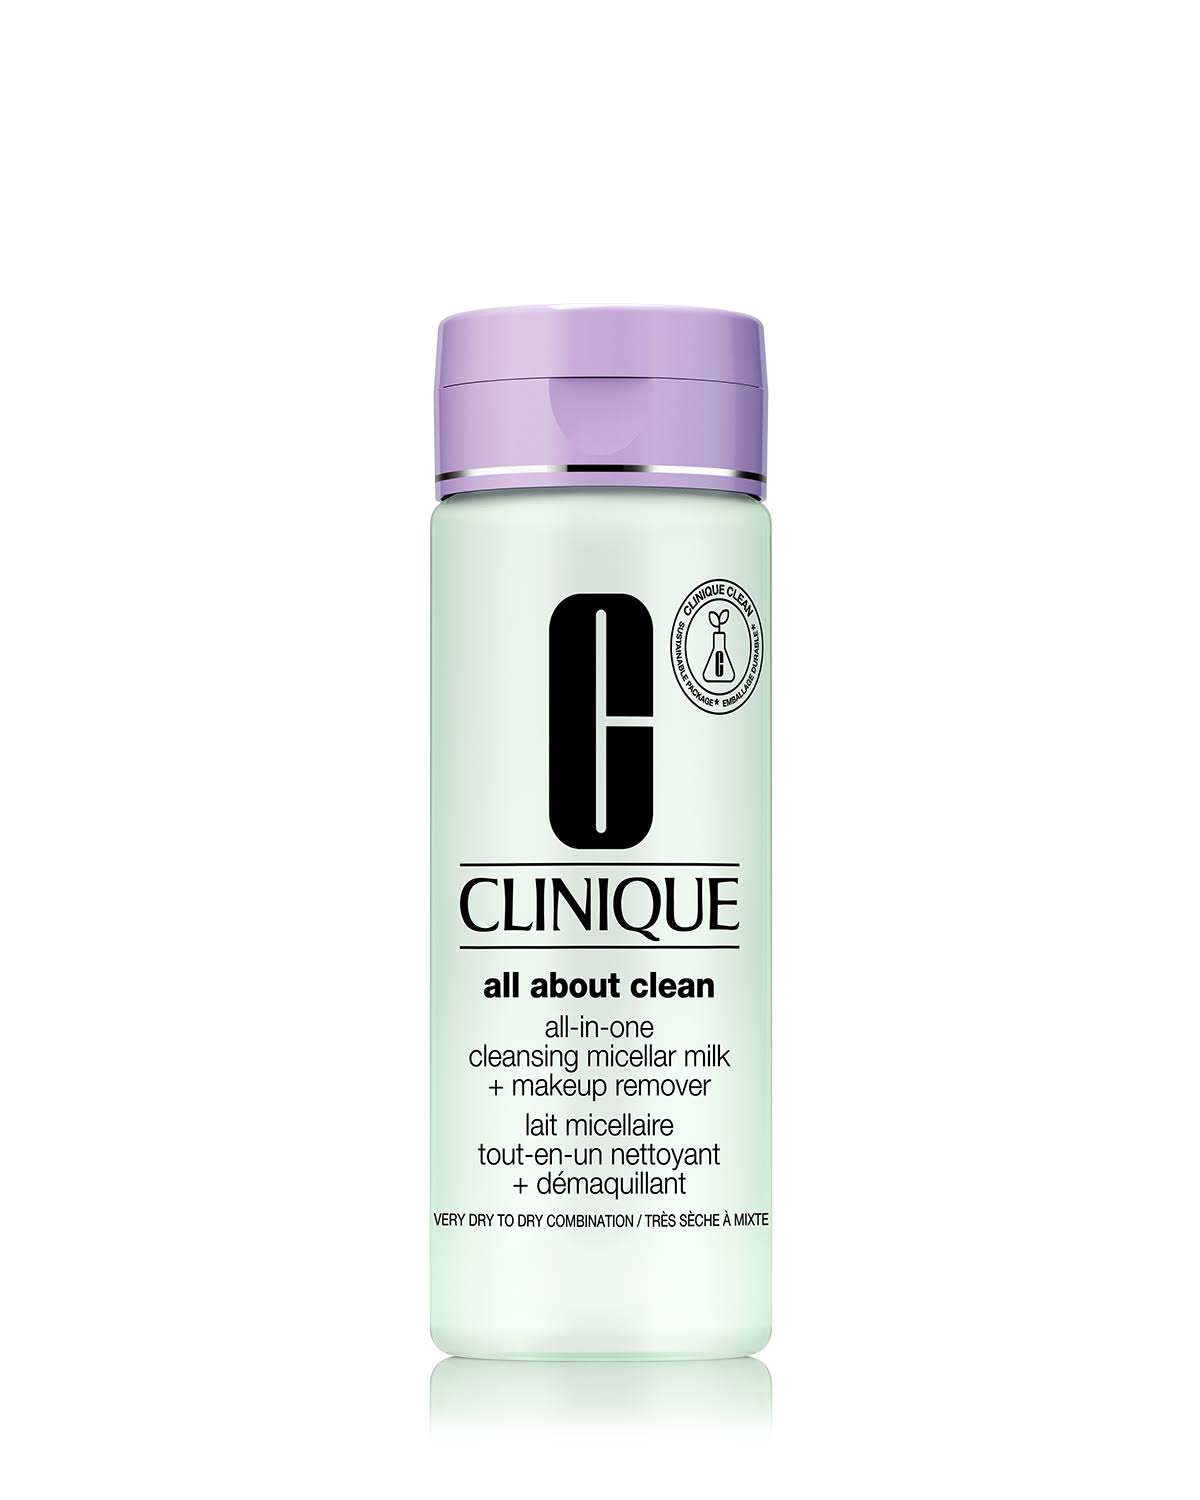 Clinique All About Clean All-in-One Cleansing Micellar Milk & Makeup Remover